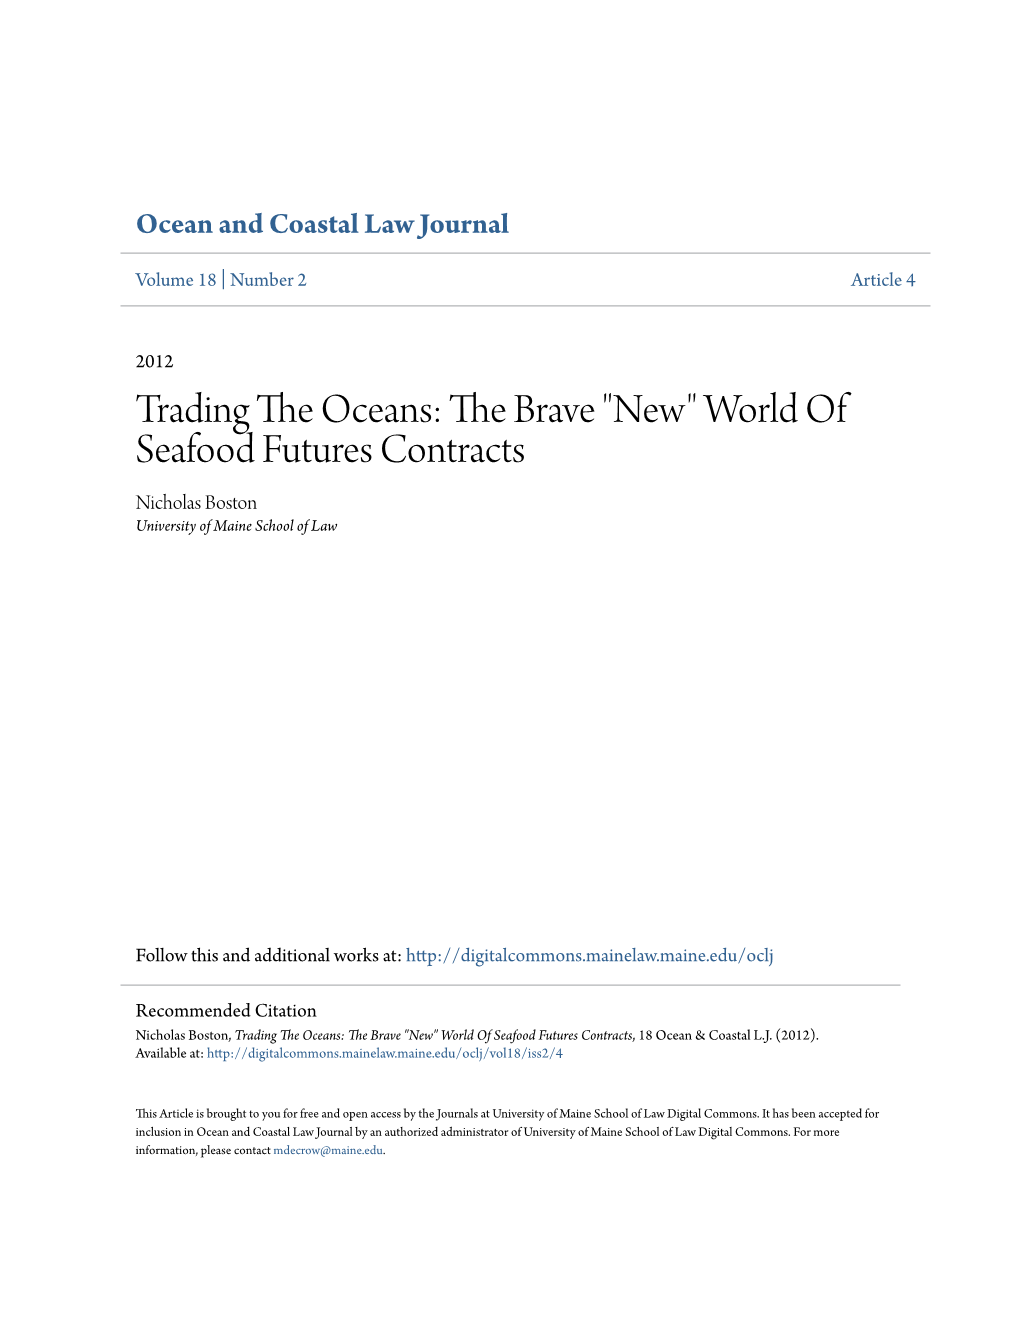 Trading the Oceans: the Brave "New" World of Seafood Futures Contracts, 18 Ocean & Coastal L.J